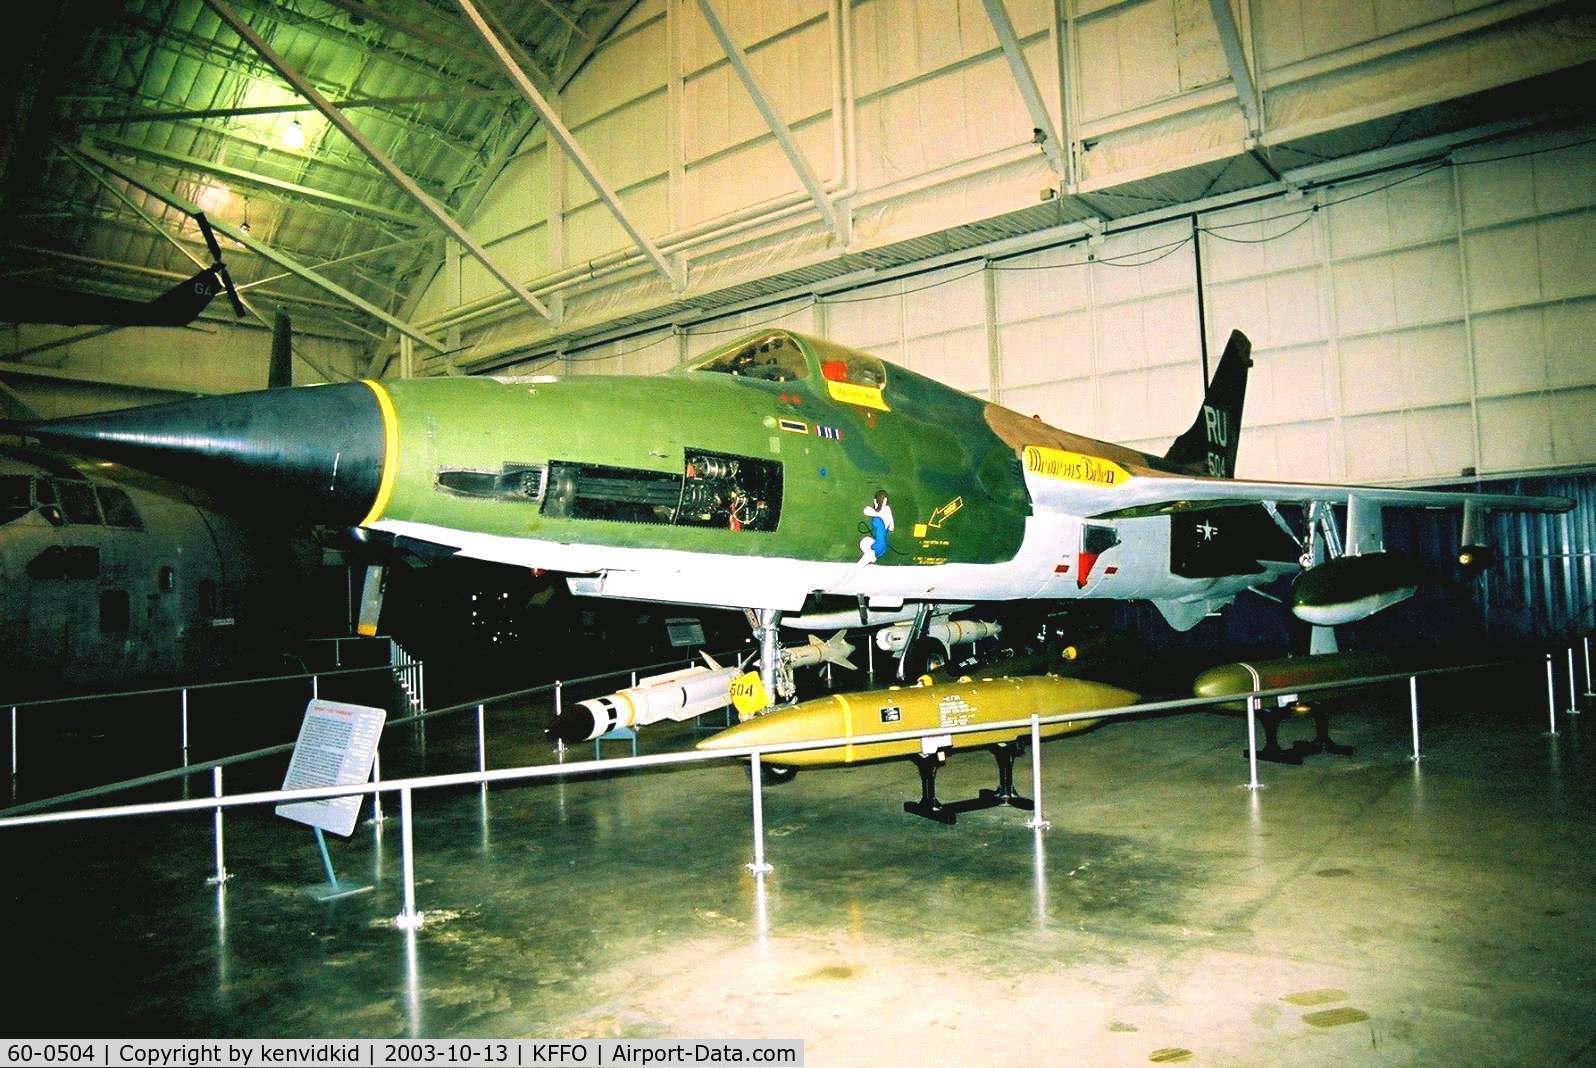 60-0504, 1961 Republic F-105D Thunderchief C/N D192, At the Museum of the United States Air Force Dayton Ohio.